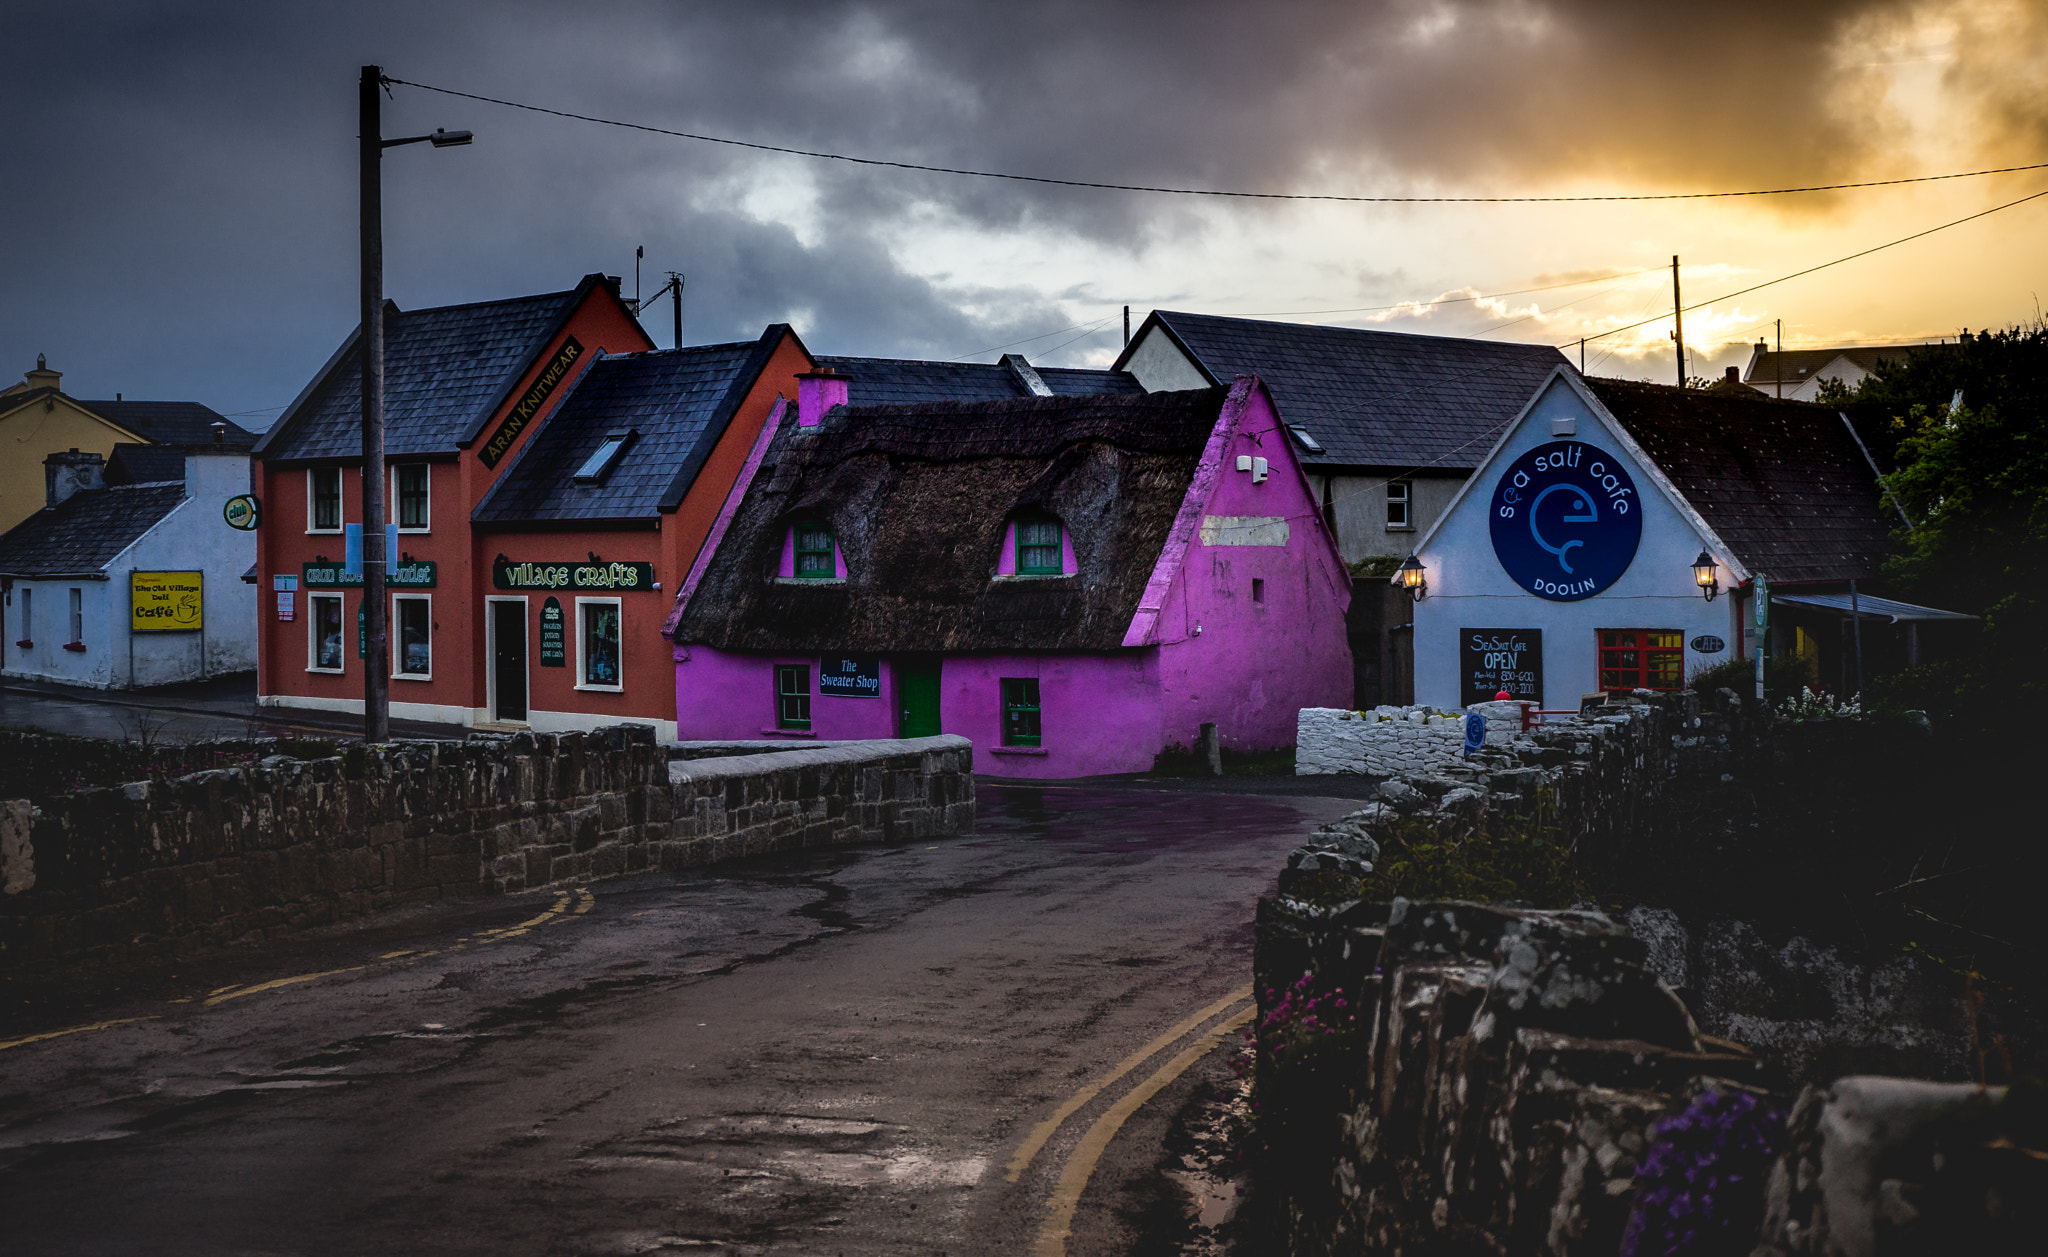 Sony a7 sample photo. Fishing village in ireland photography